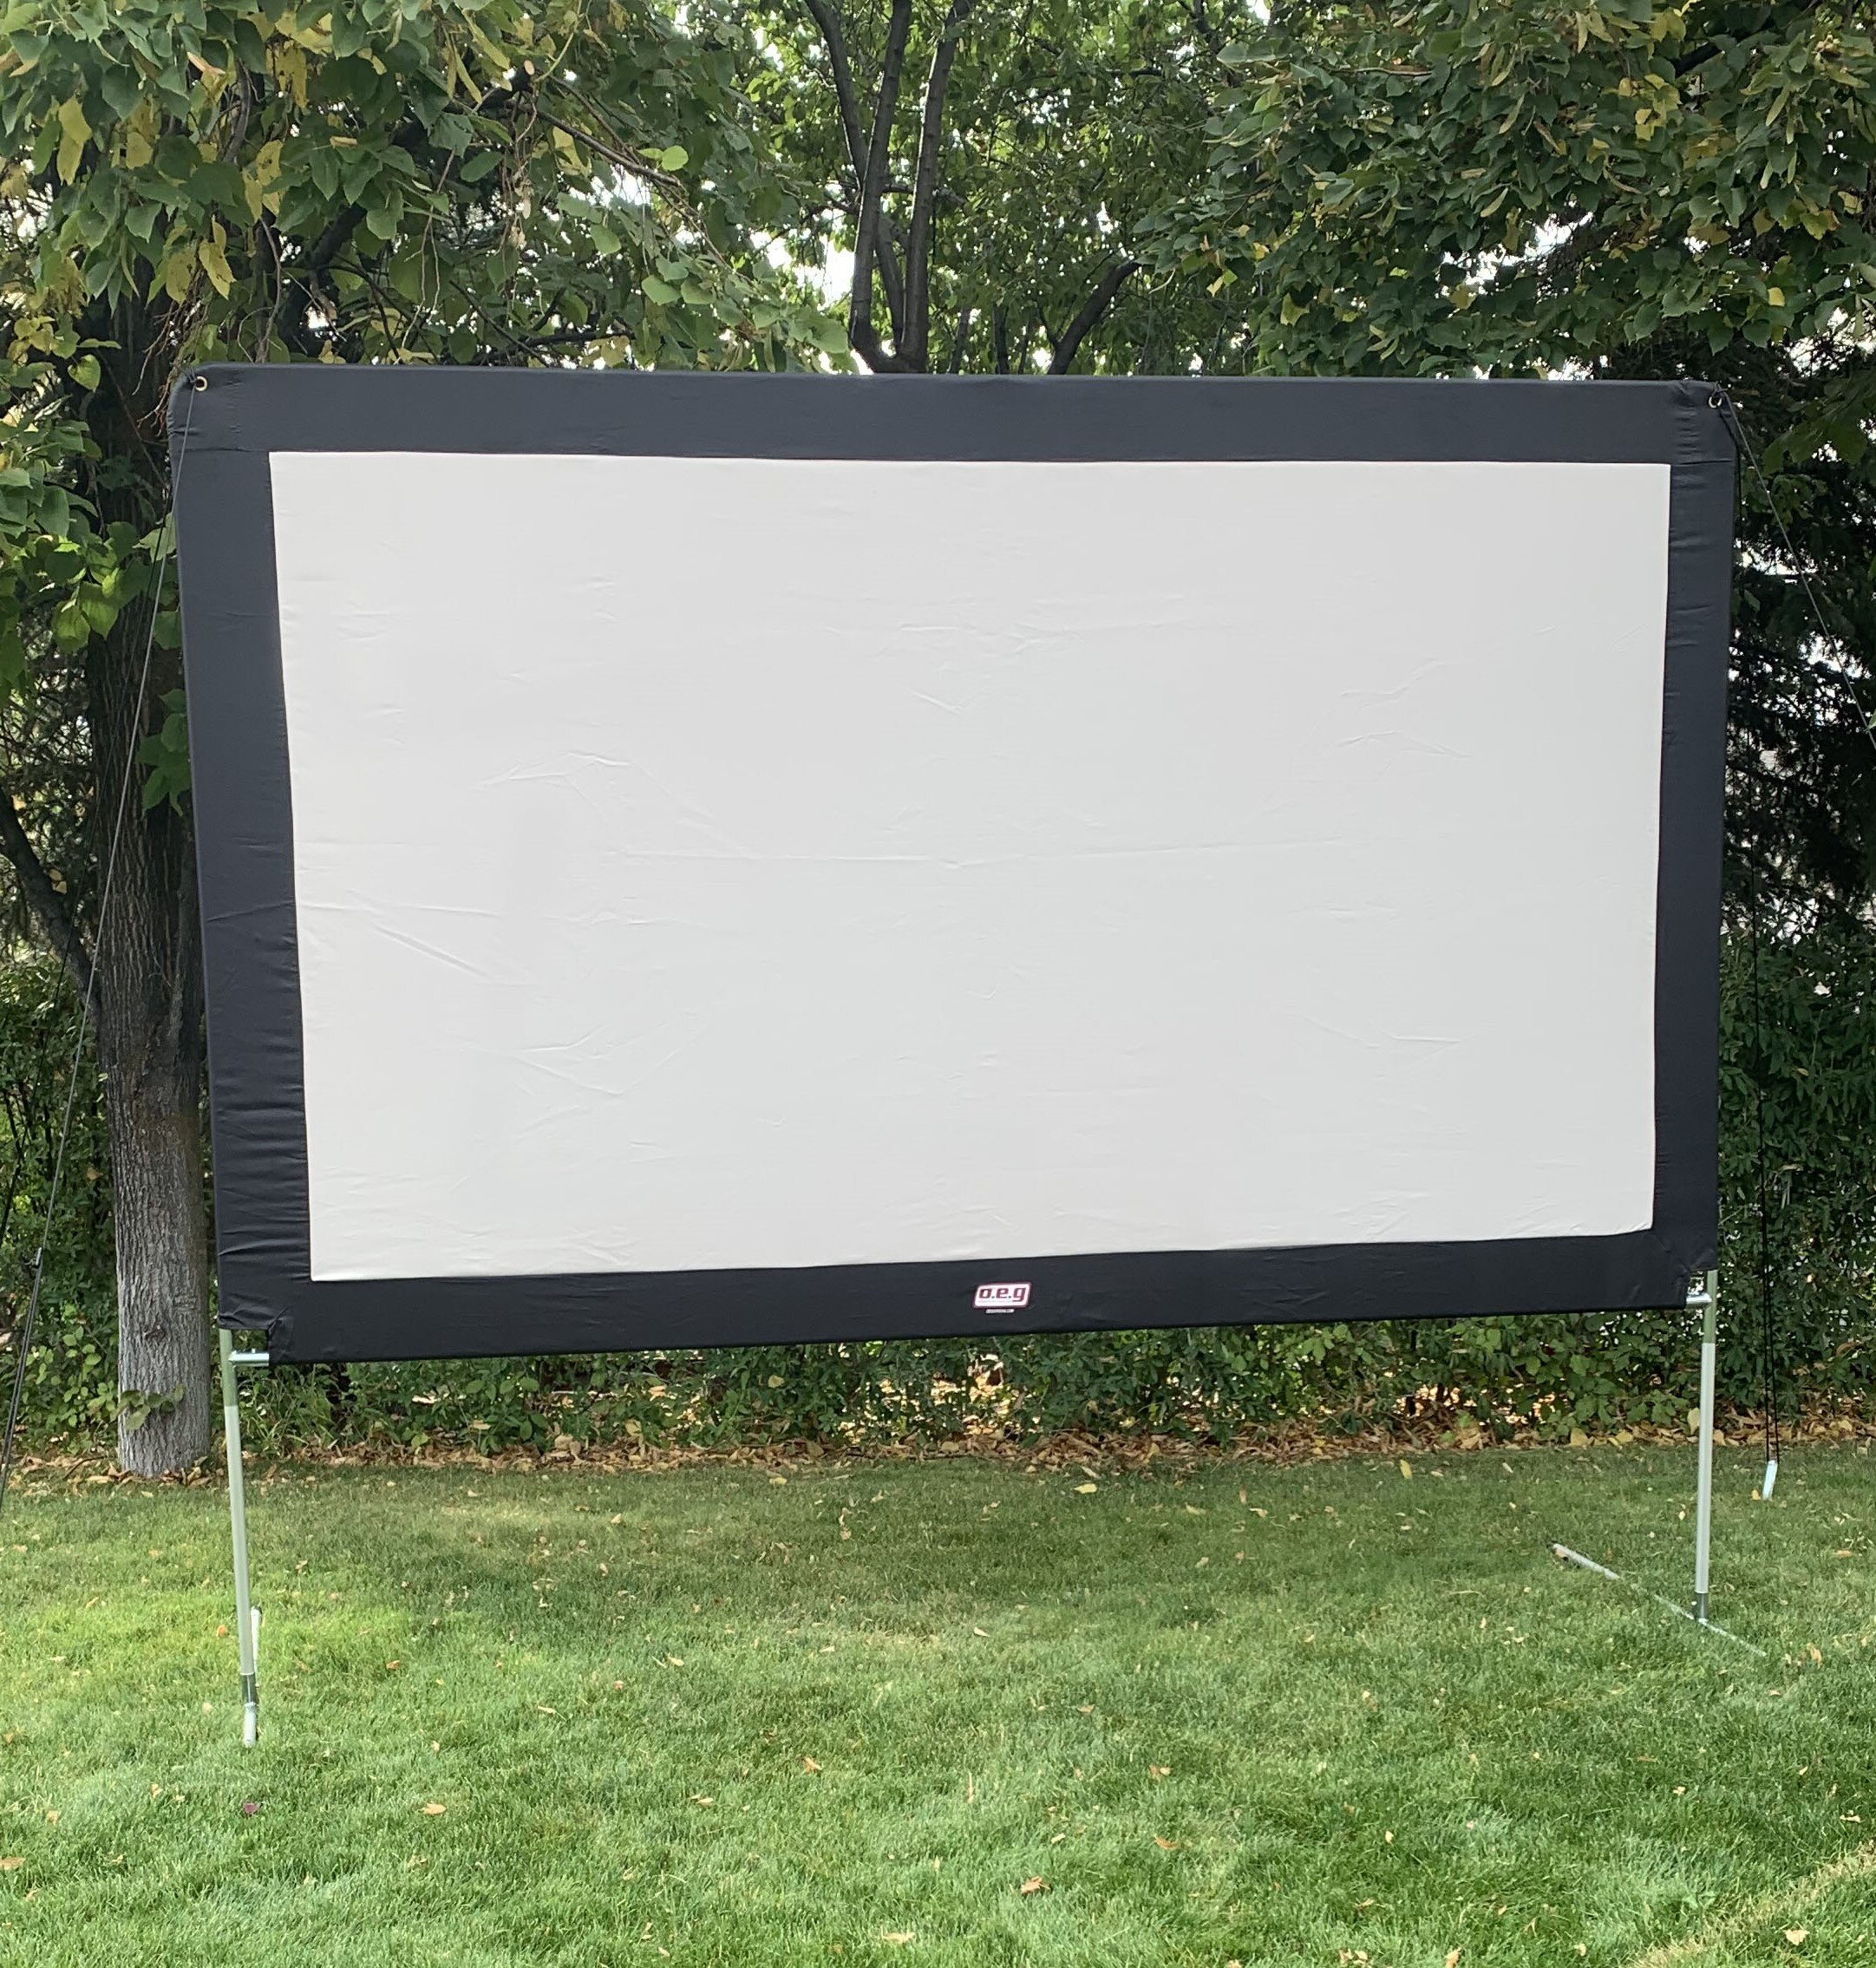 Projector Projection Screen 16:9 3D HD Home Cinema Outdoor Theater 120" Inch 